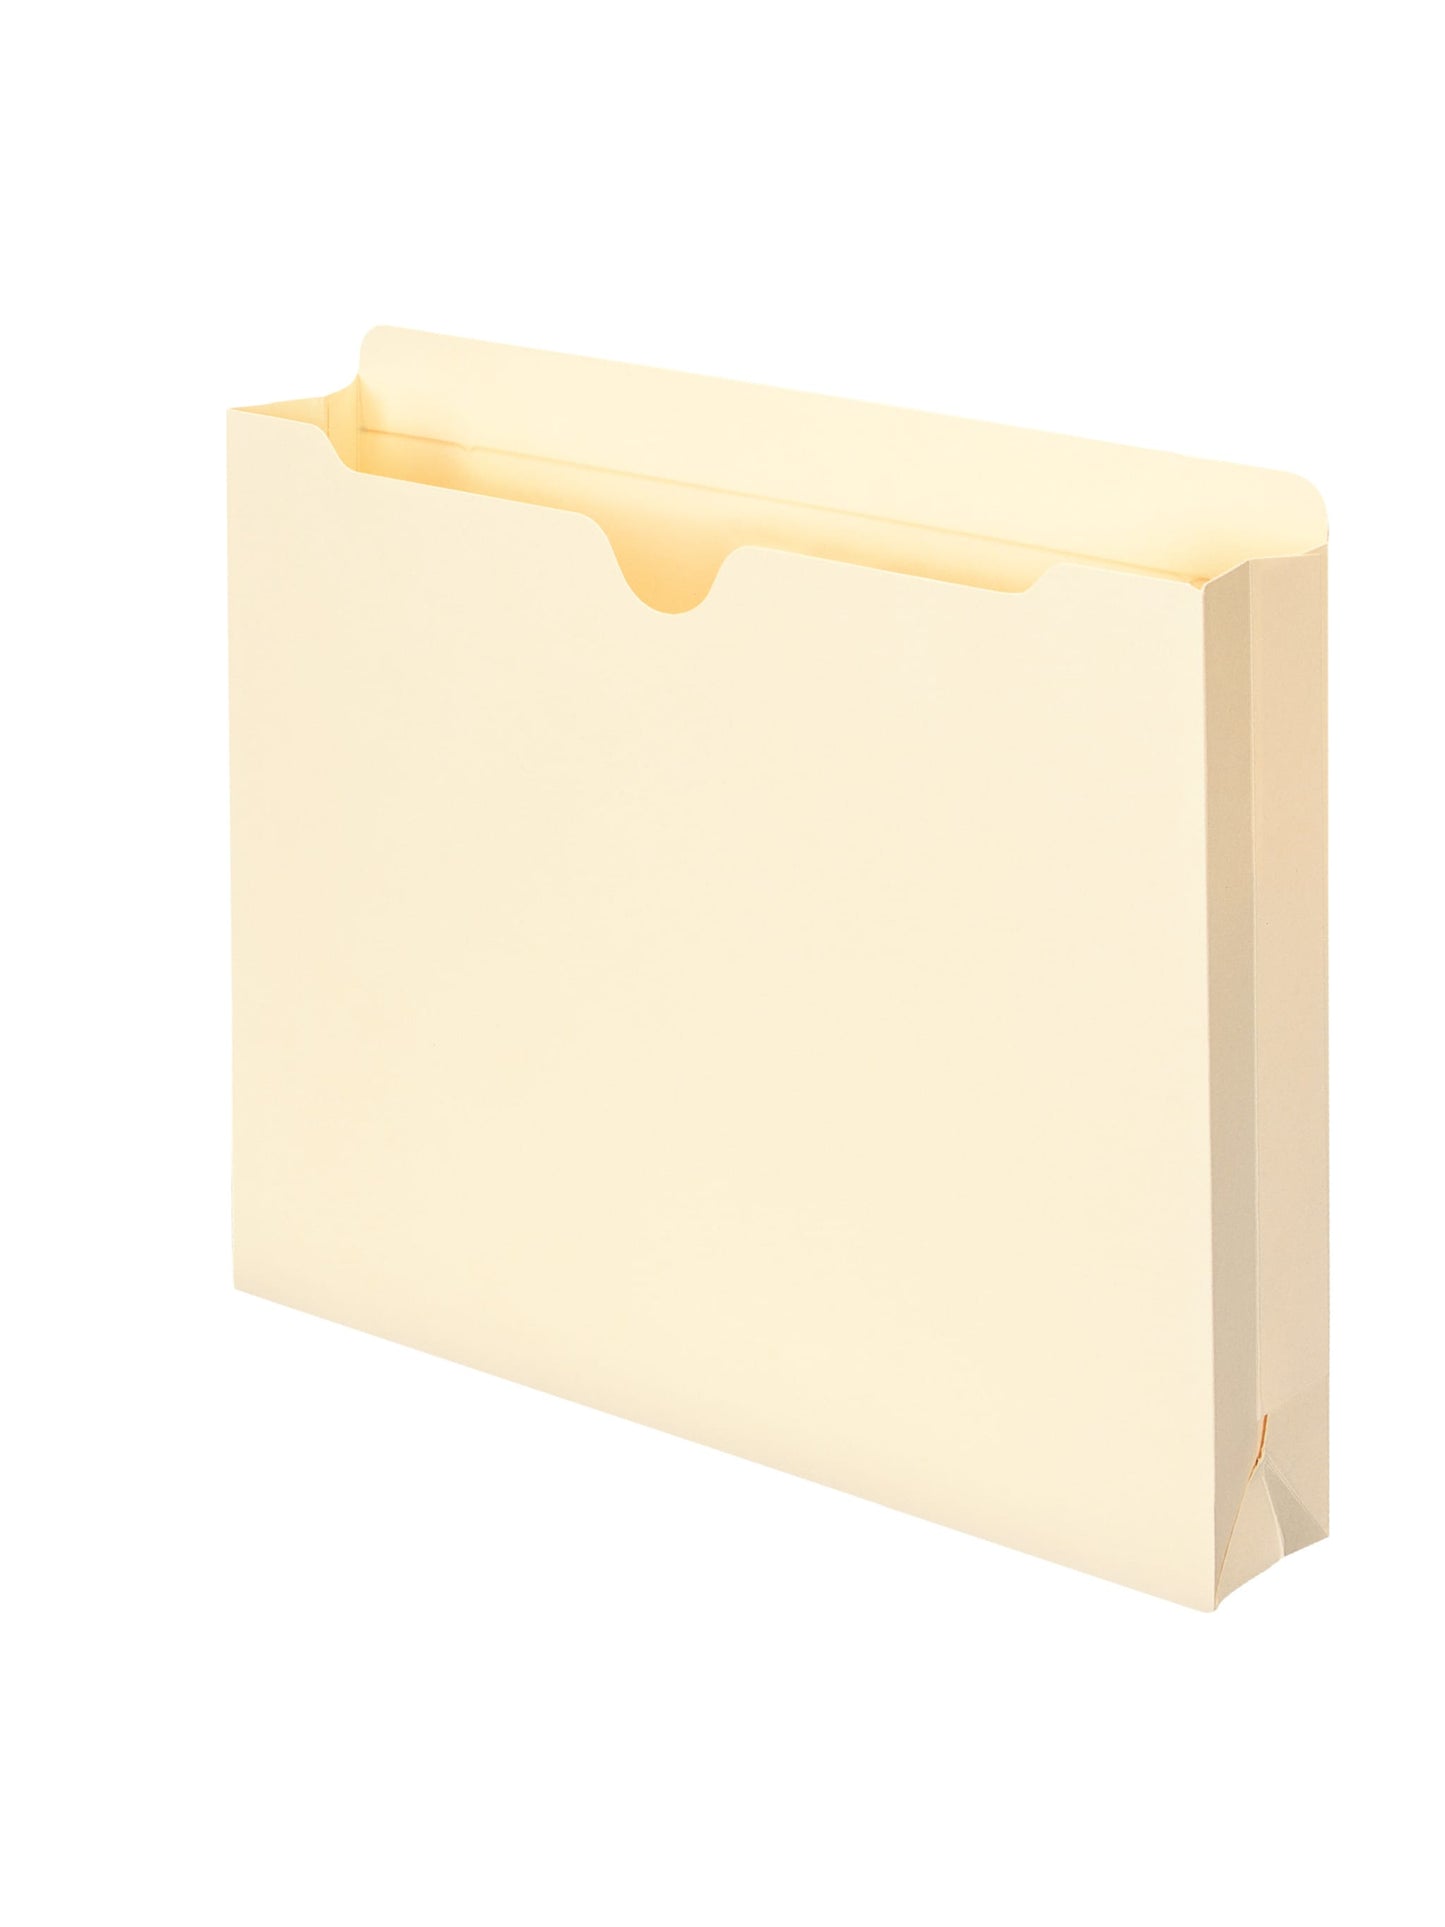 File Jackets, Flat-No Expansion, Straight-Cut Tab, Manila Color, Letter Size, Set of 100, 086486755658